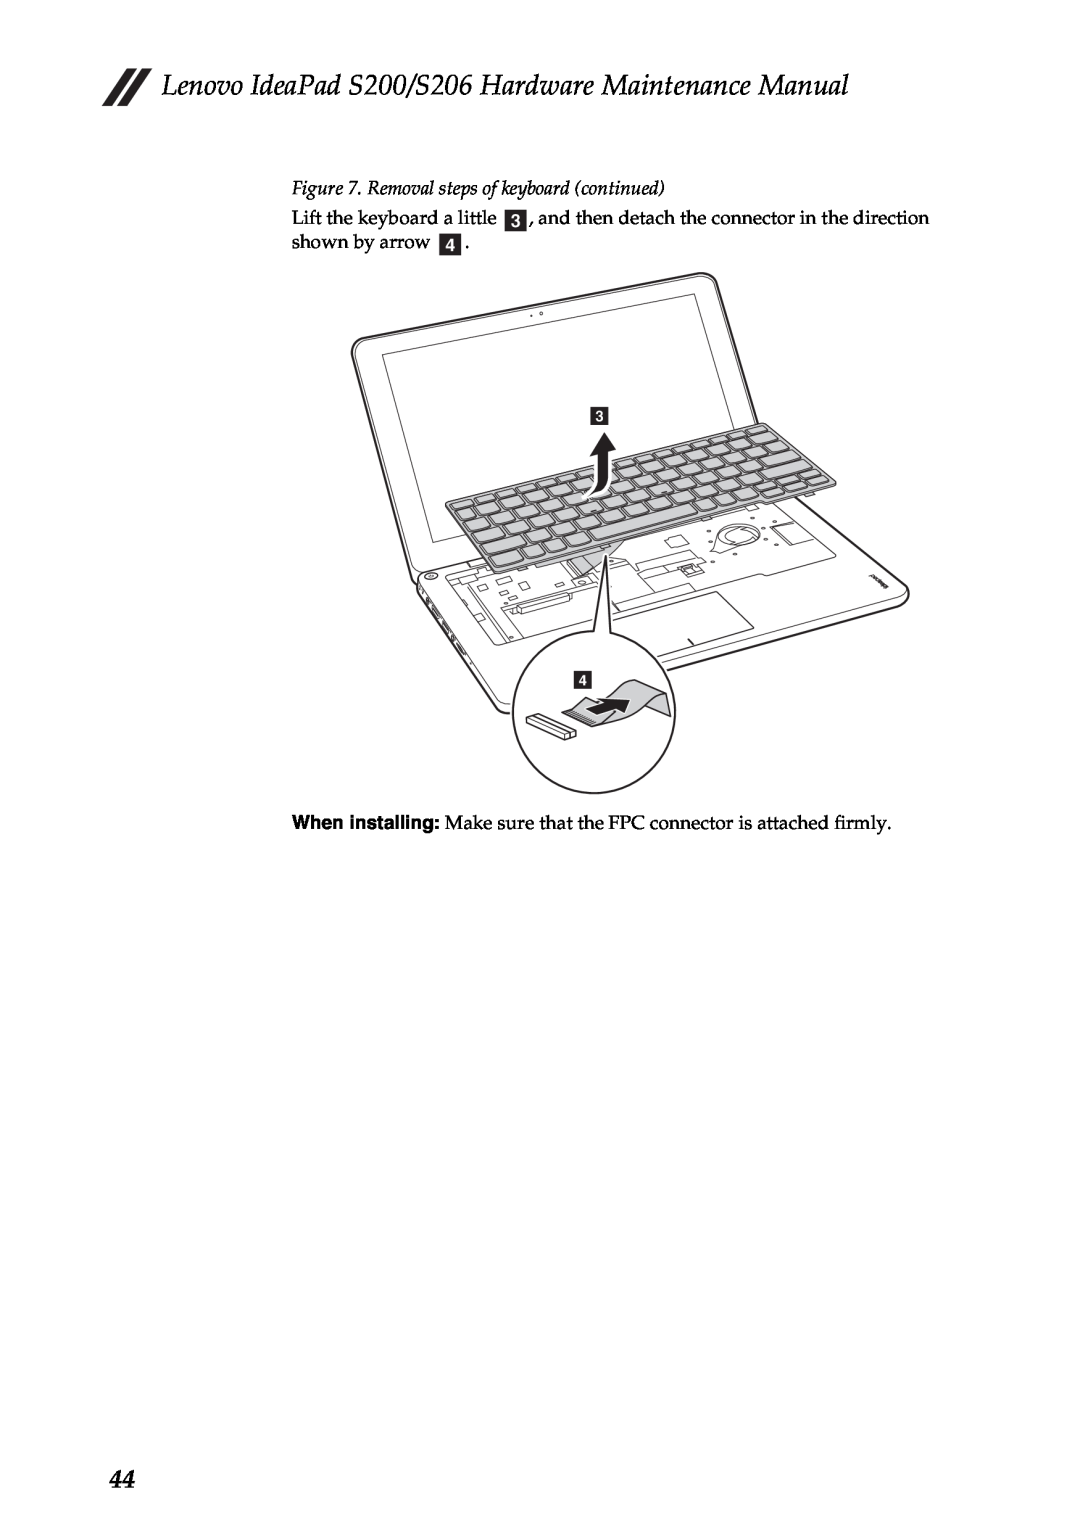 Lenovo S206, S200 manual Removal steps of keyboard continued 